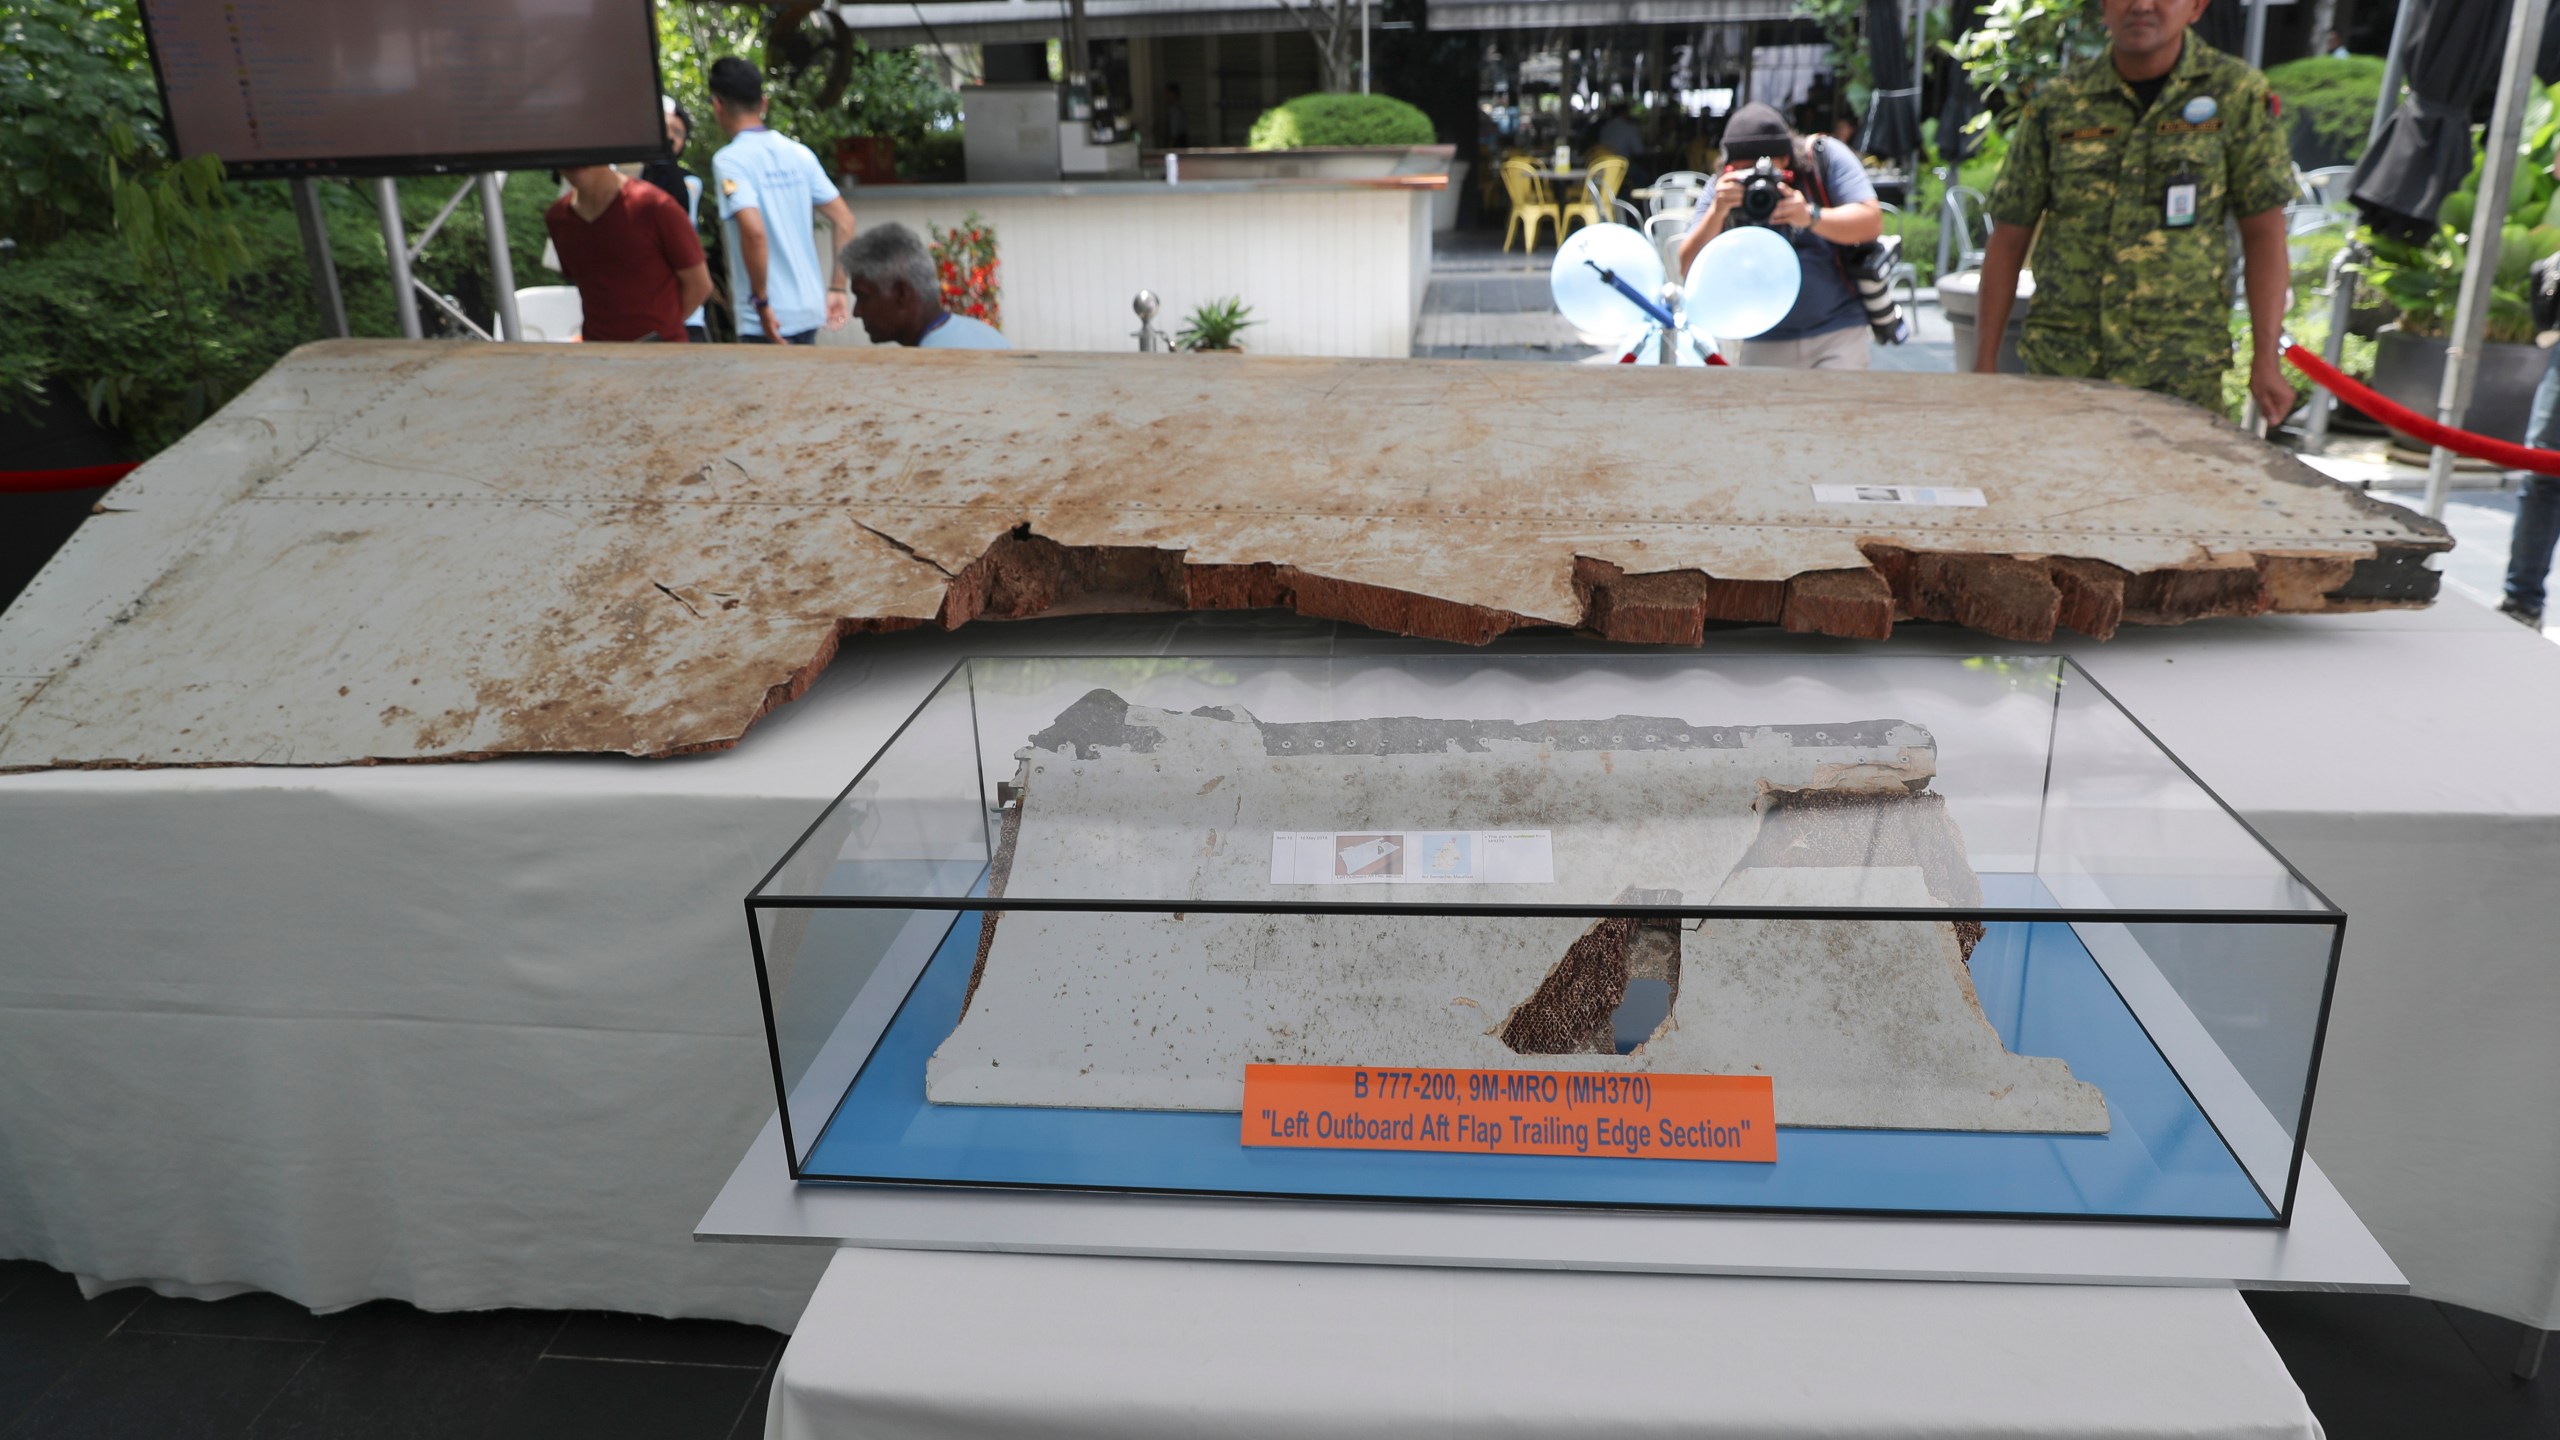 FILE - Debris from the missing Malaysia Airlines Flight MH370 is displayed during a Day of Remembrance for MH370 event in Kuala Lumpur, Malaysia, on March 3, 2019. A decade ago this week, a Malaysia Airlines flight vanished without a trace to become one of aviation’s biggest mystery. Investigators still do not know exactly what happened to the plane and its 239 passengers. (AP Photo/Vincent Thian, File)